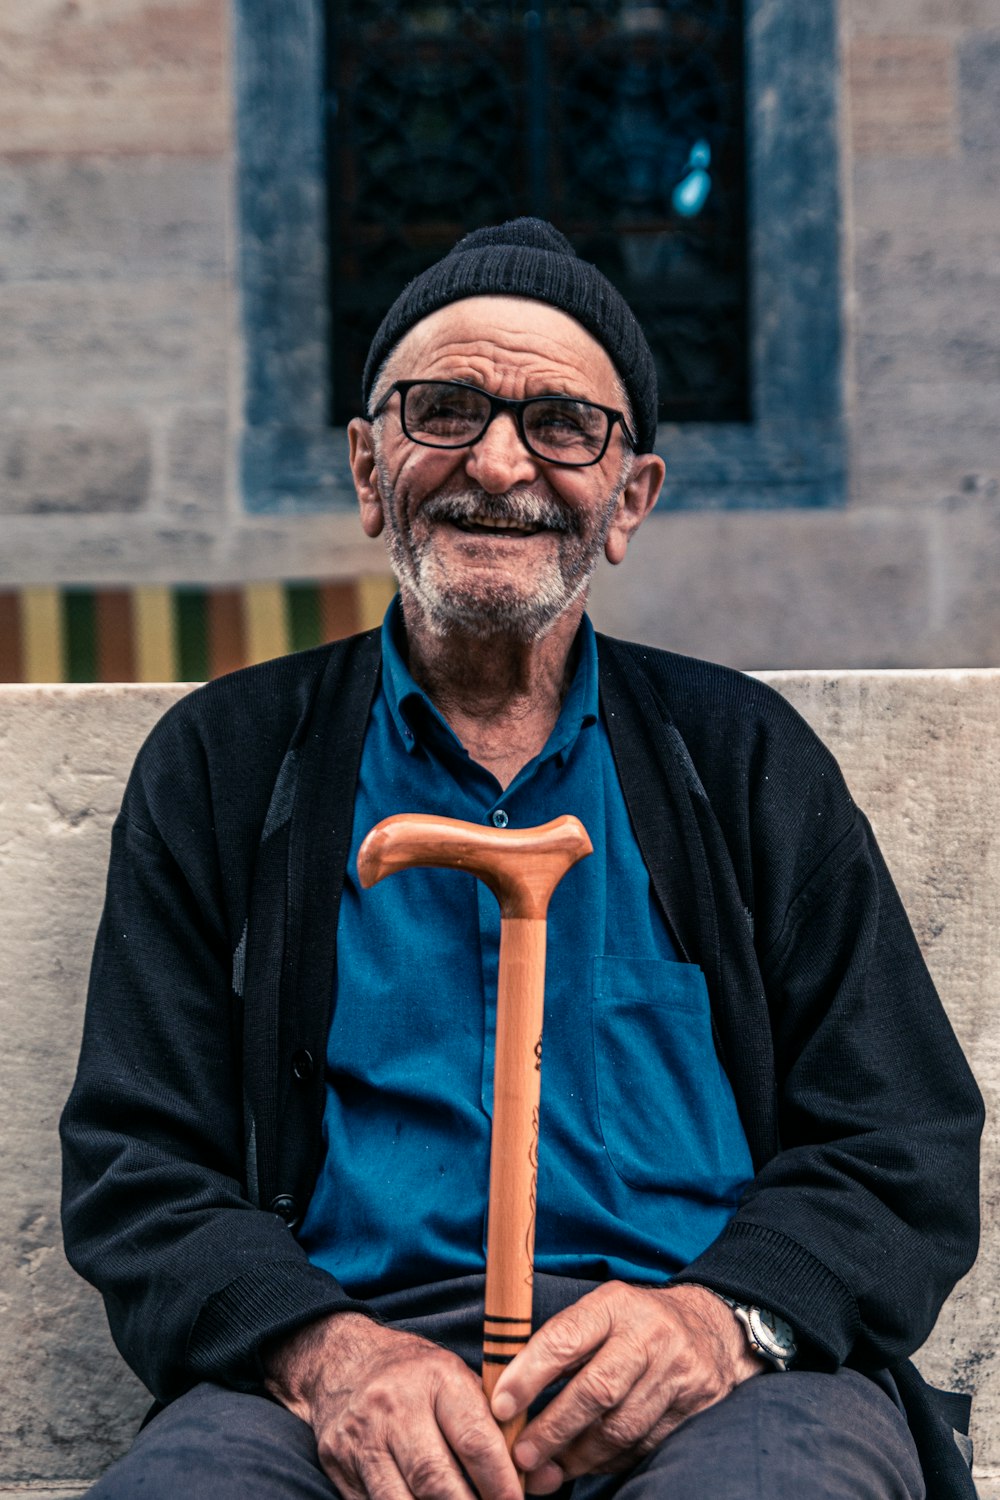 smiling man seated on bench holding cane